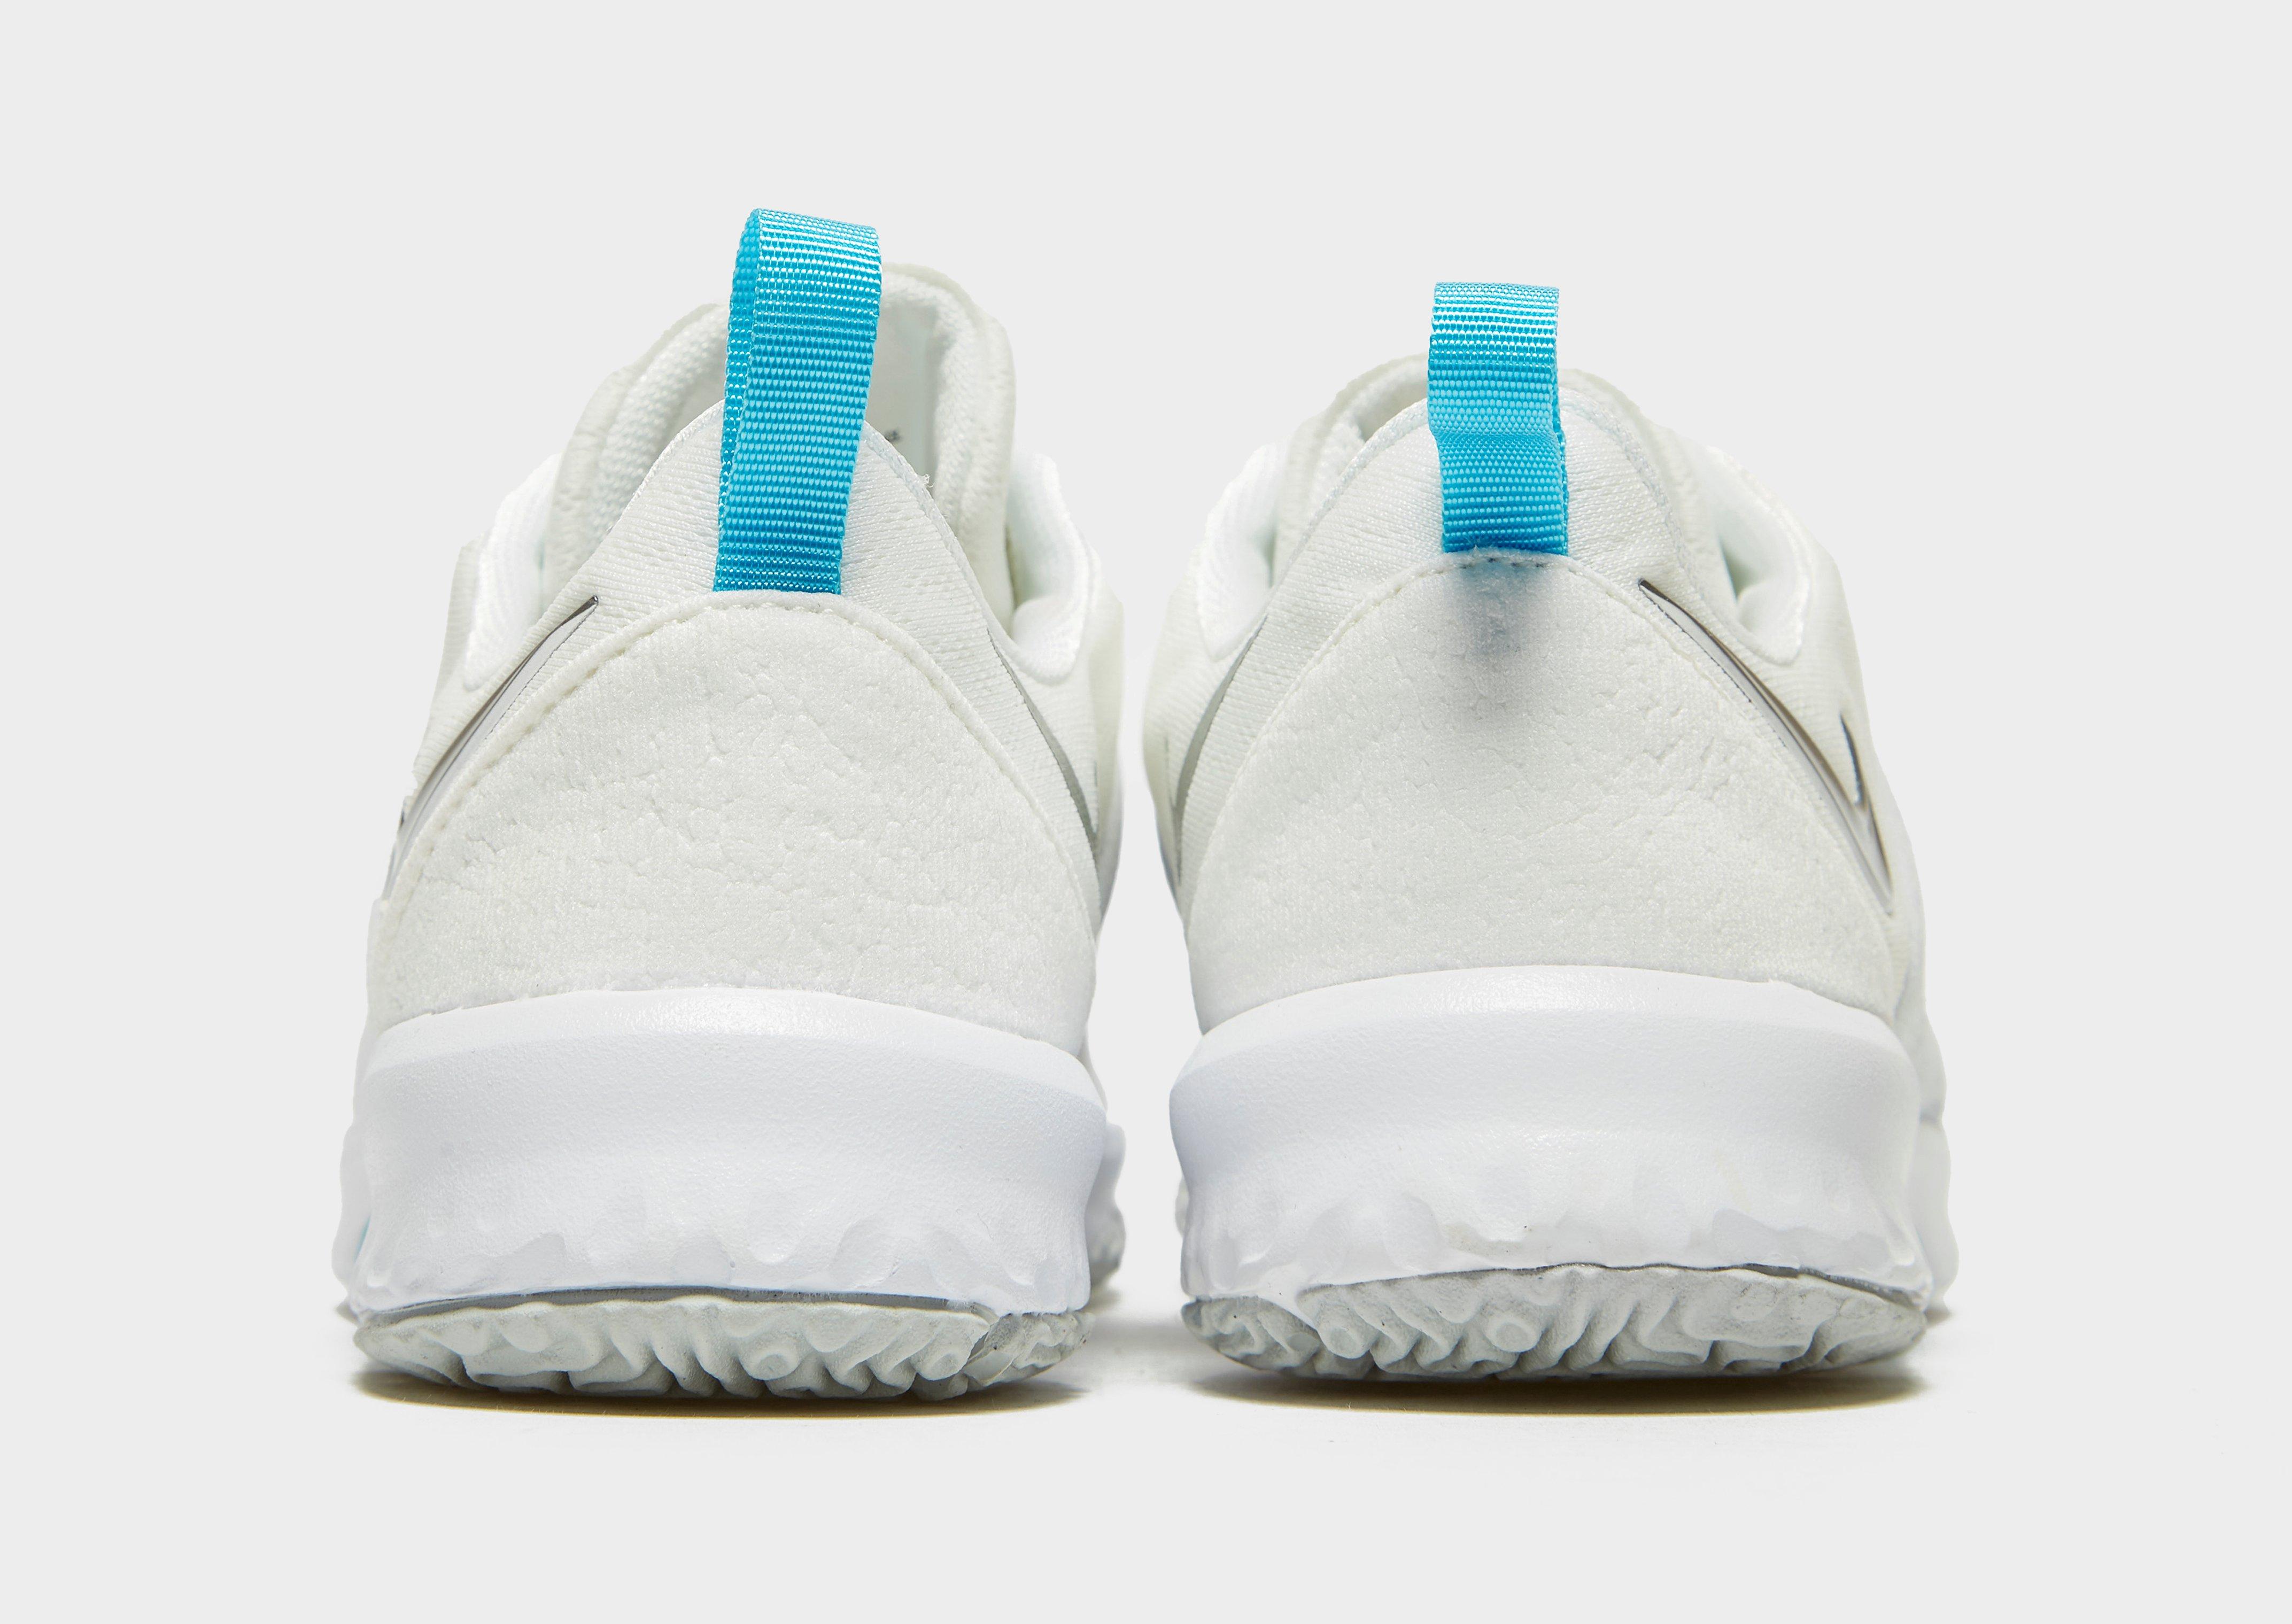 wmns nike city trainer 3